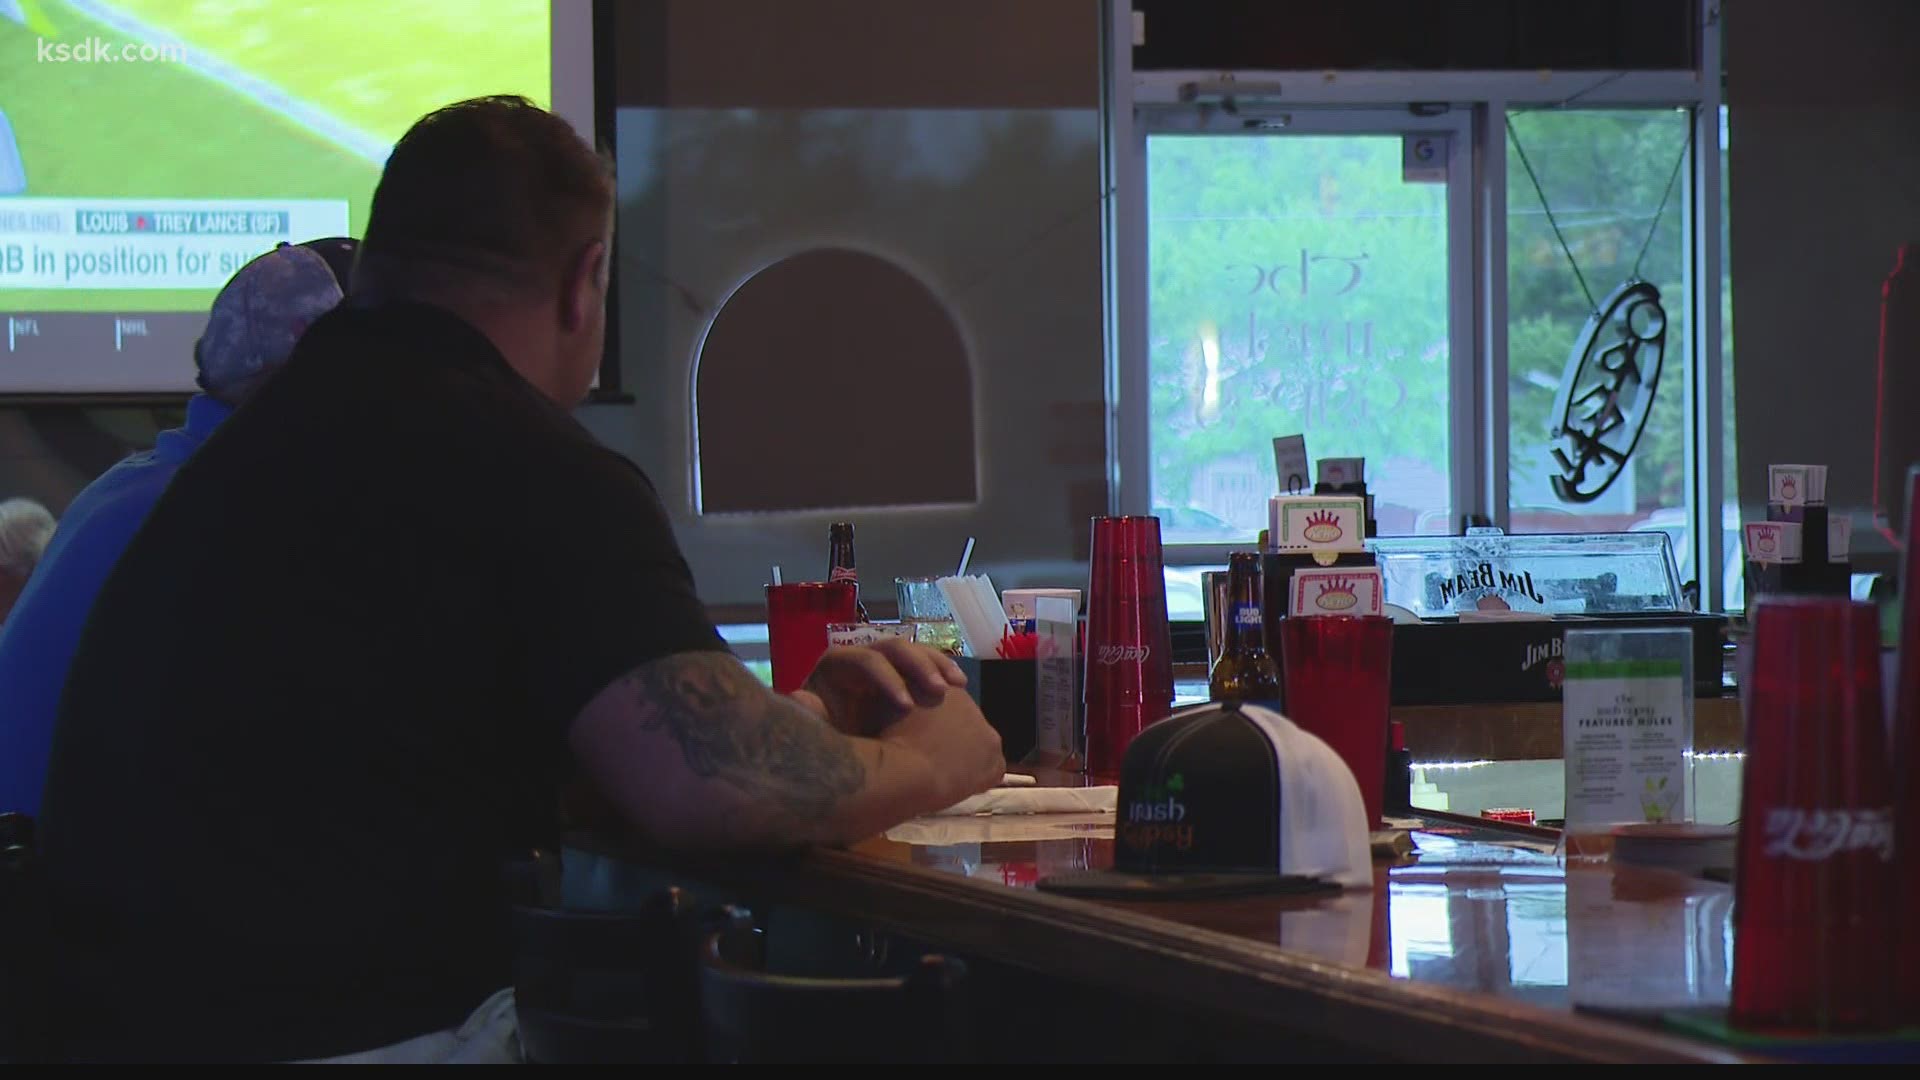 Restaurant owners say they're happy to see customers returning, but ask for your patience